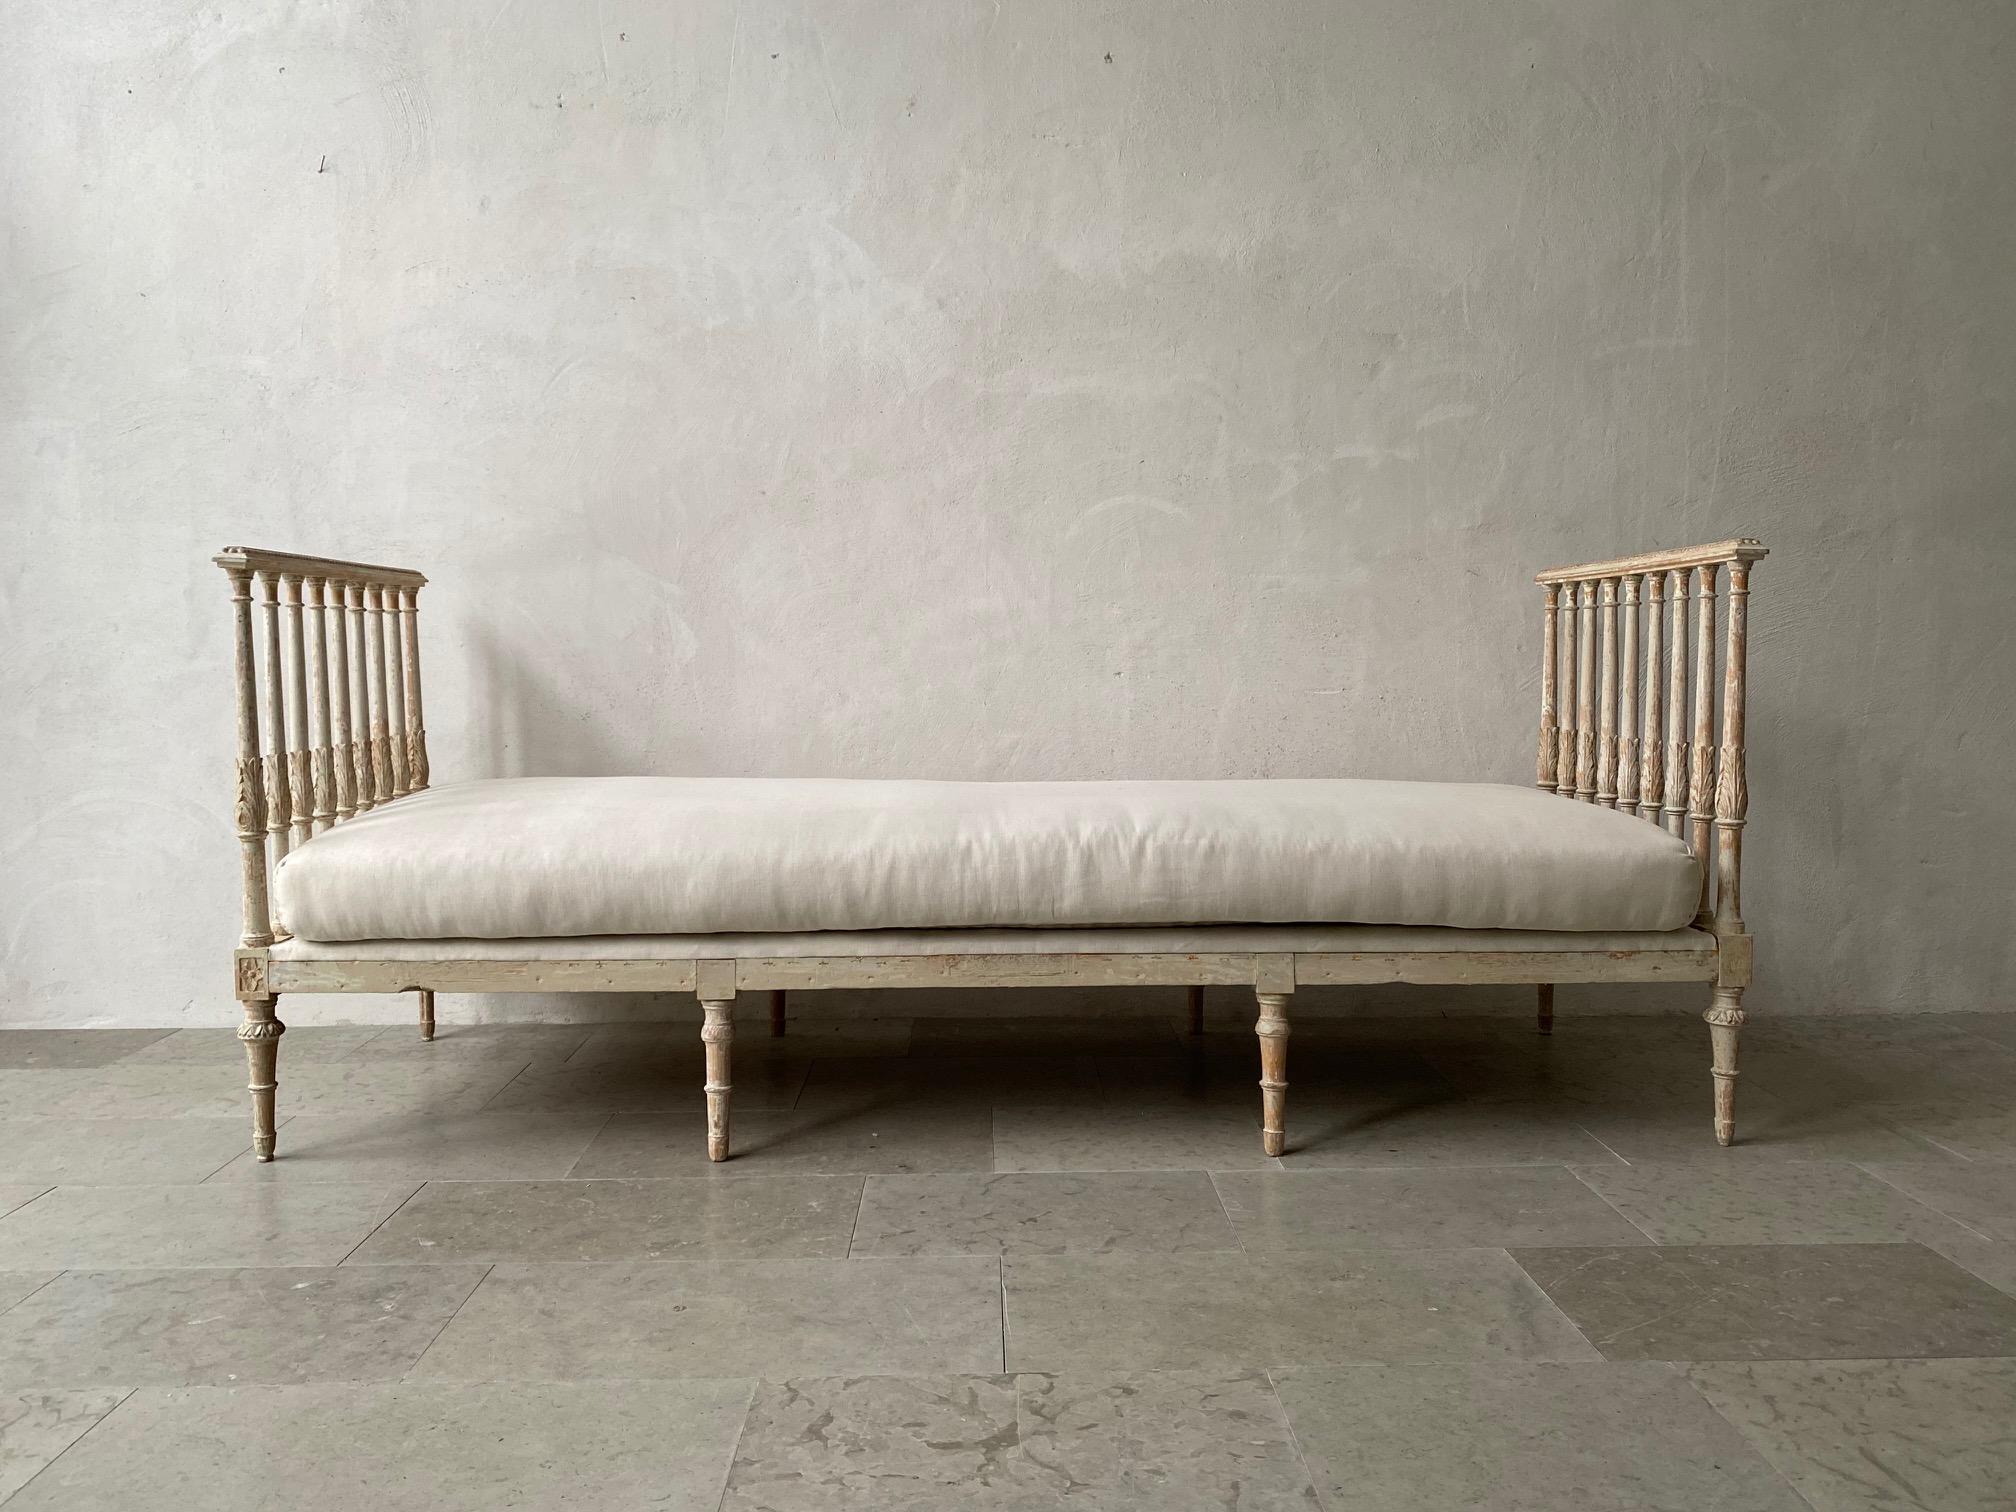 18th C. Swedish Gustavian Period Daybed Sofa in Original Paint by Johan Lindgren 1